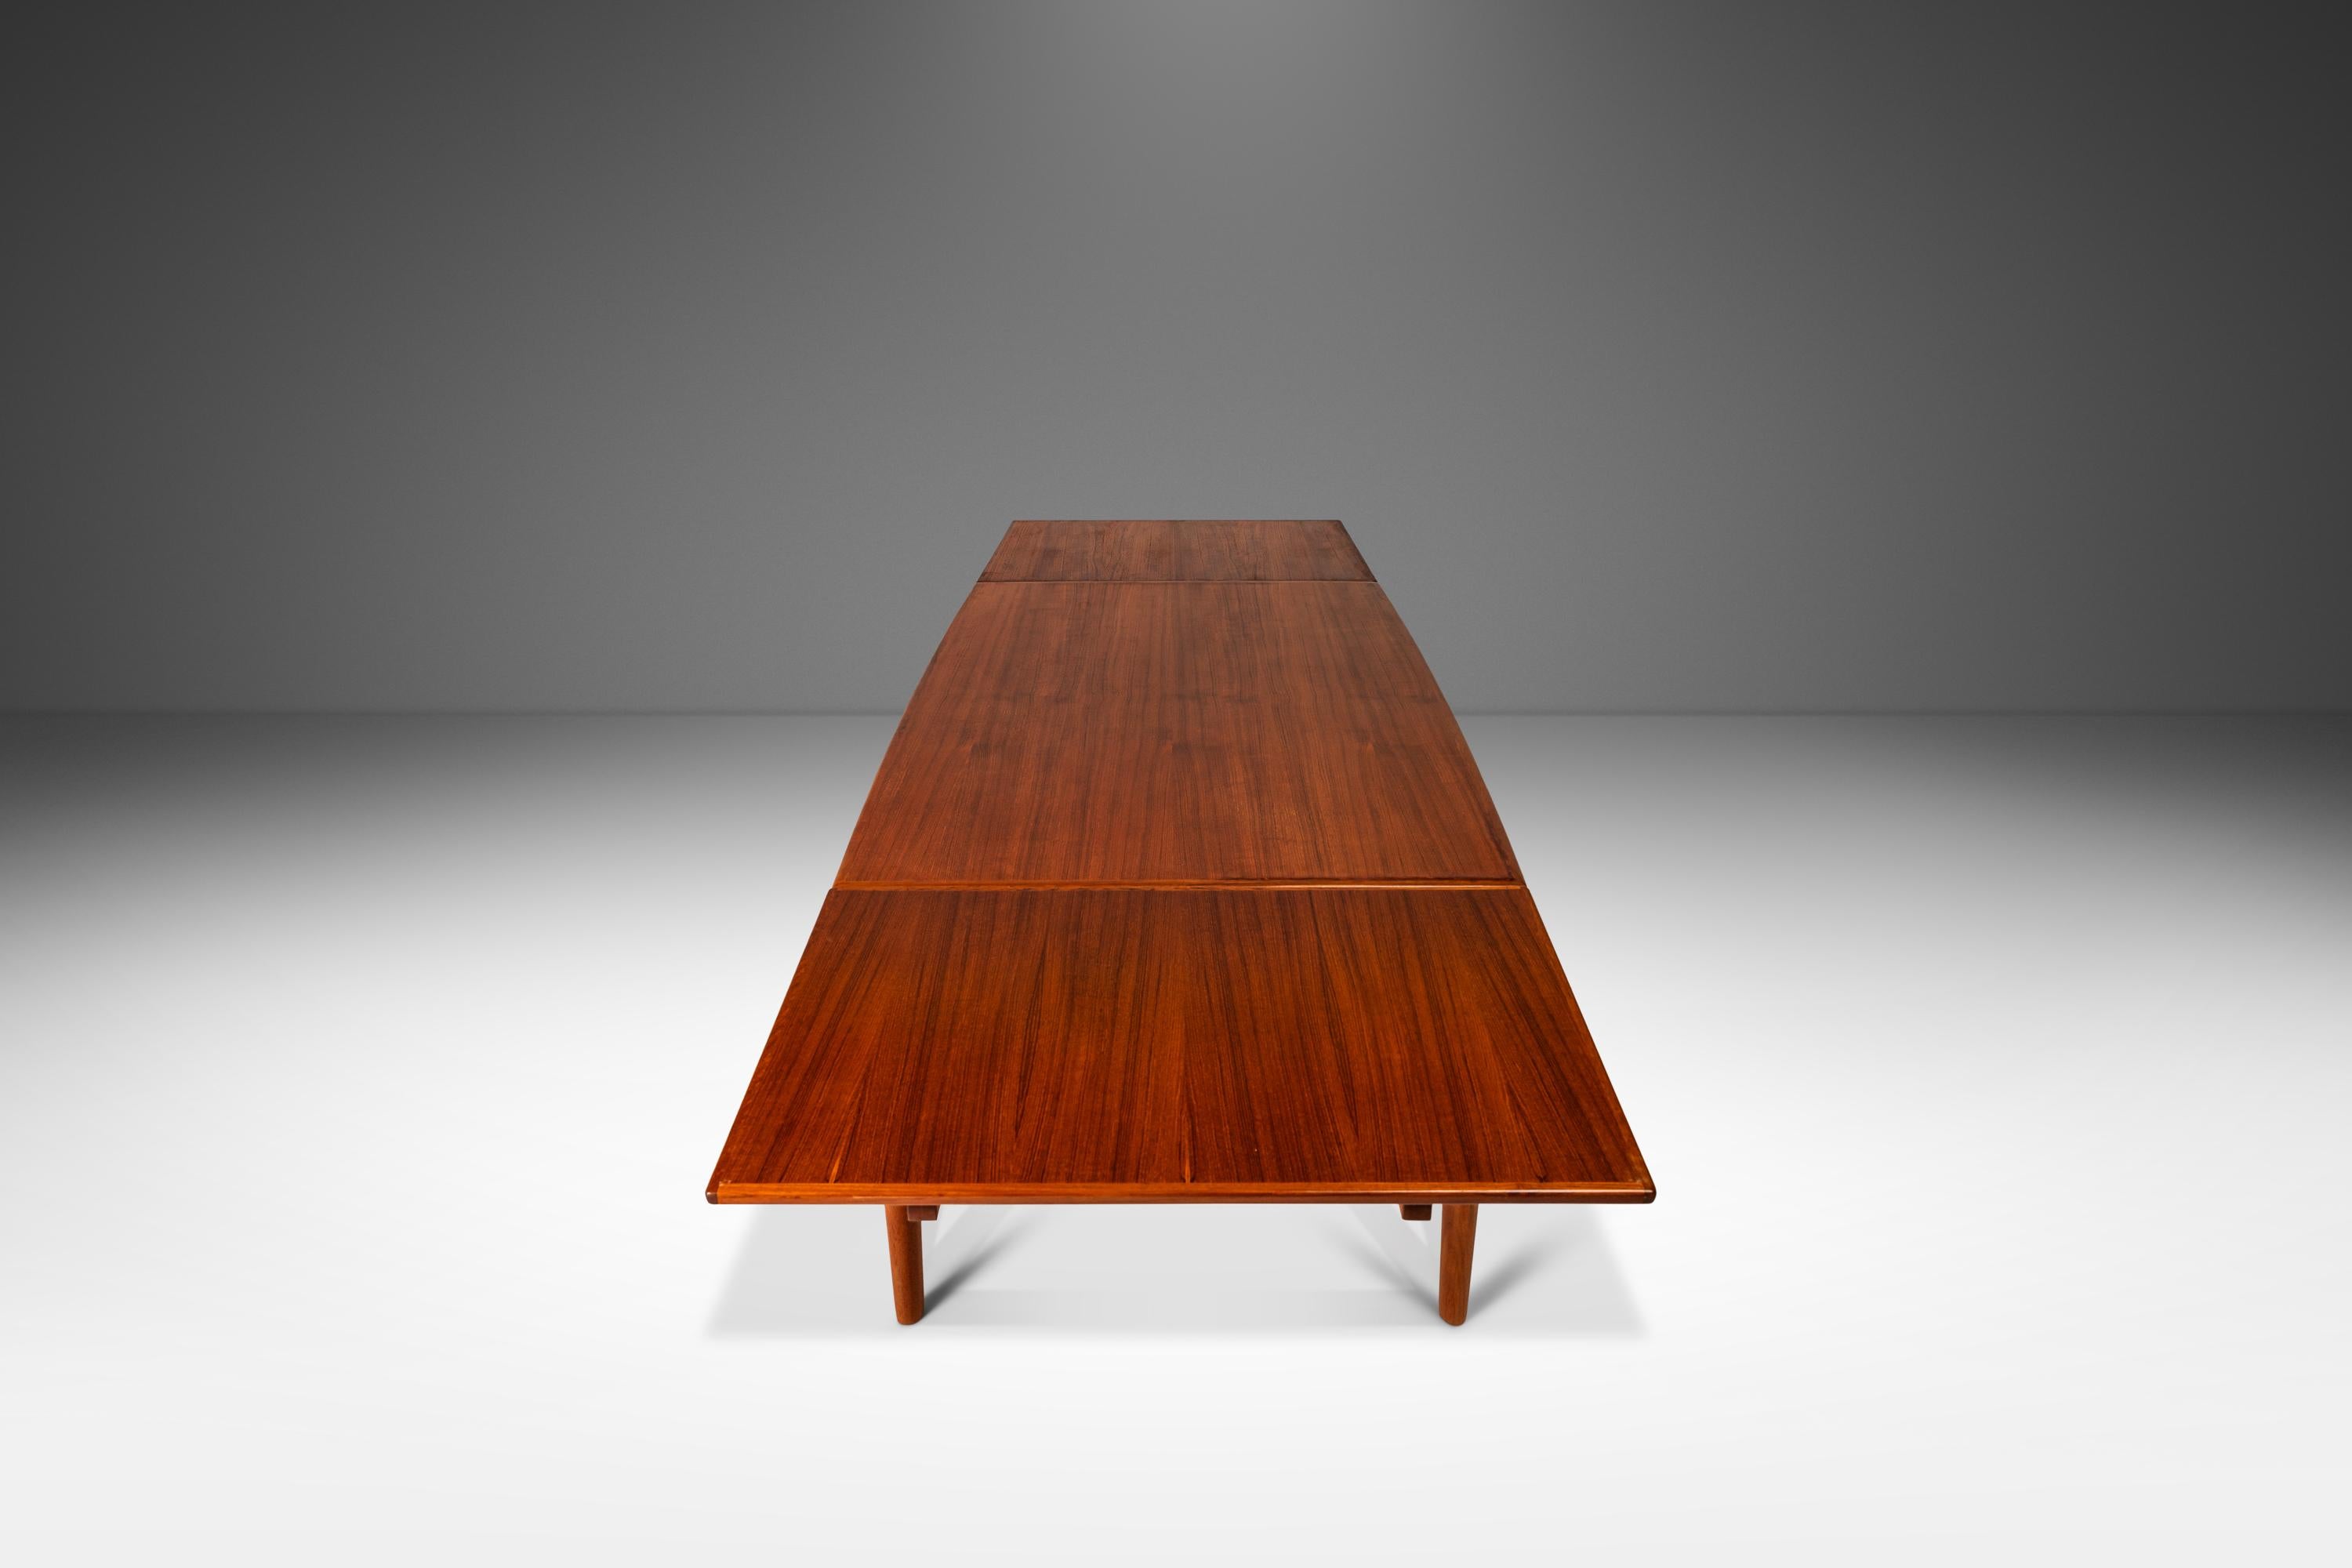 Danish Modern Expansion Dining Table in Teak w/ Stow-in-Table Leaves, c. 1960s For Sale 1